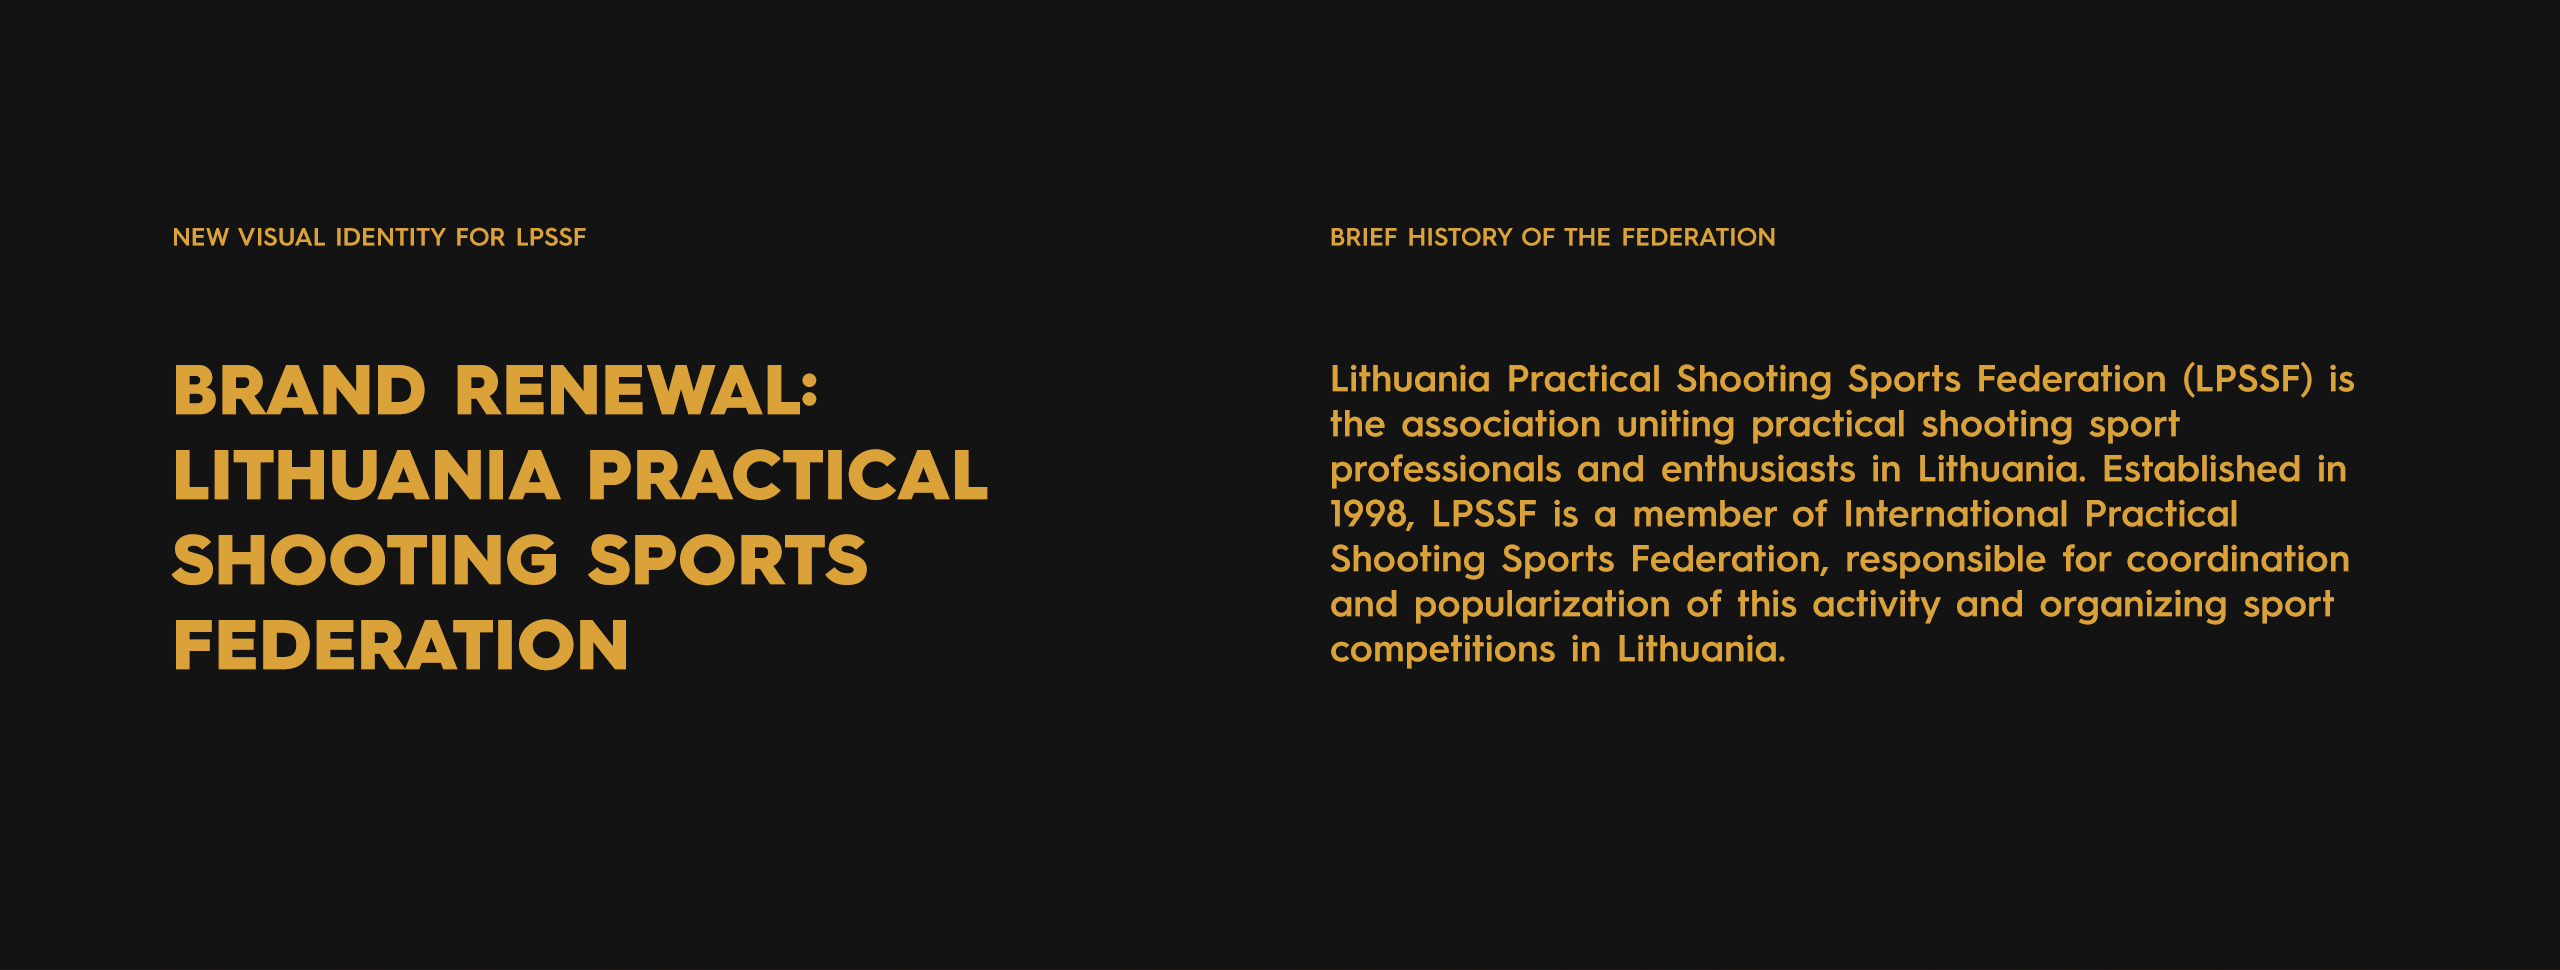 Lithuania practical shooting sports federation logo in a dark background with two glock 19 and some 9mm bullets